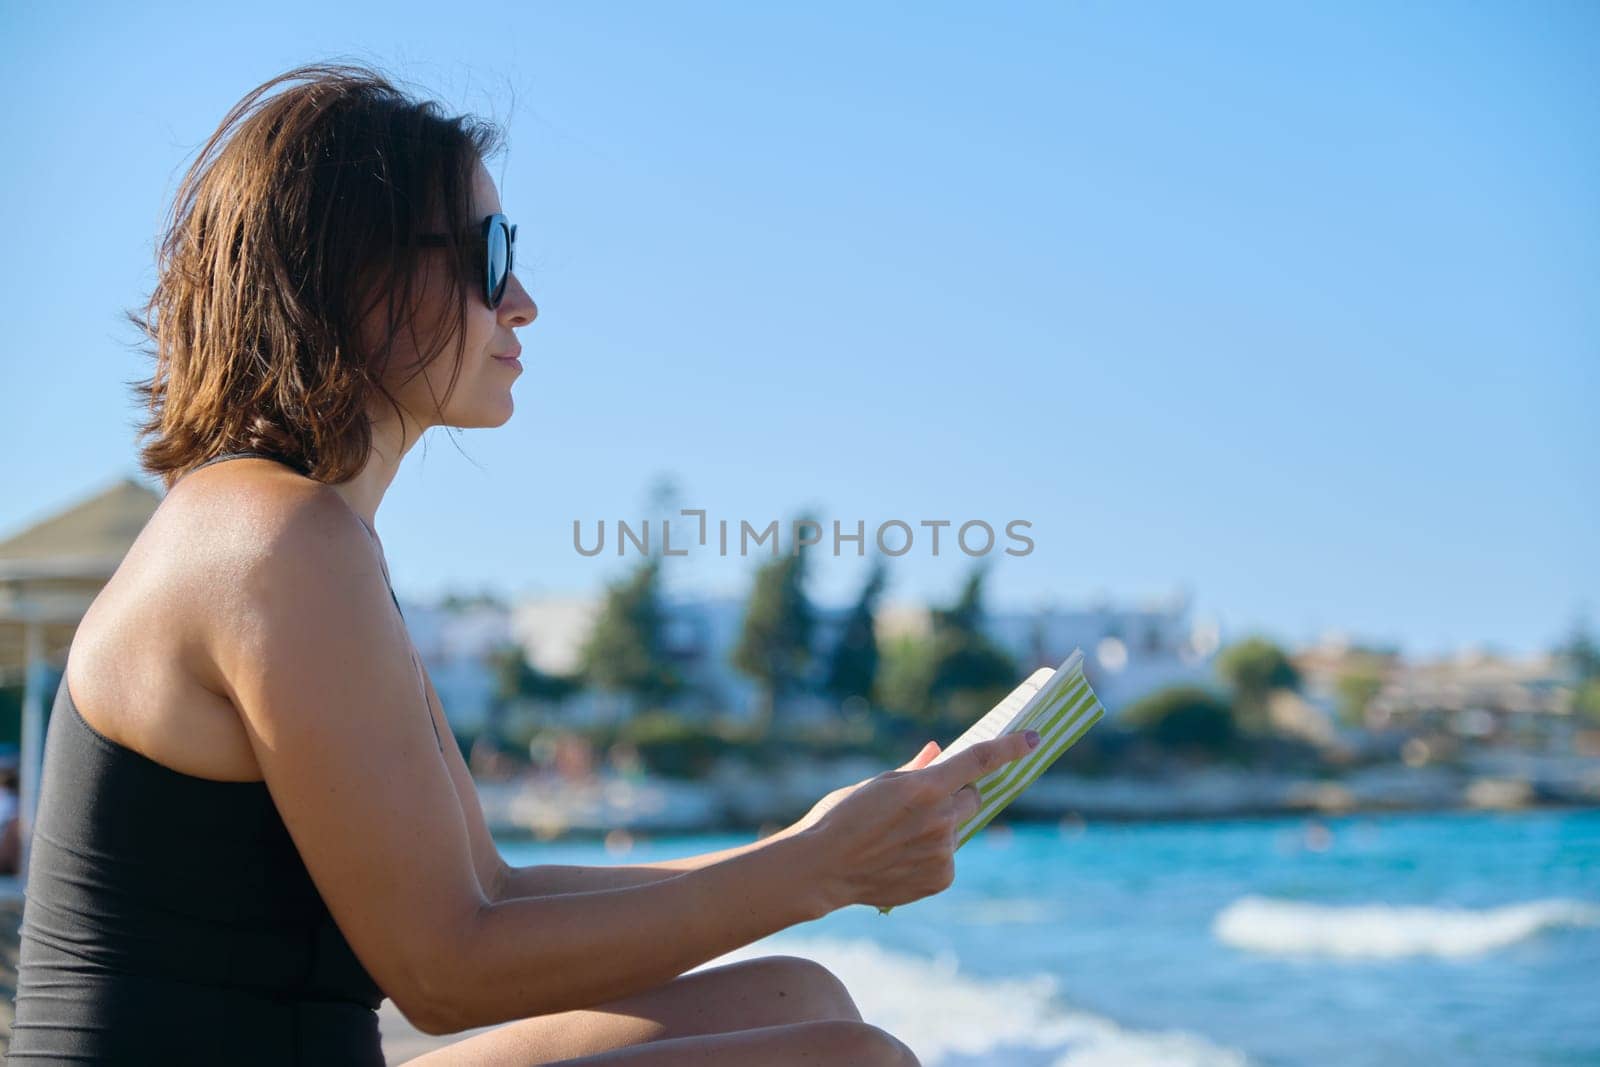 Mature woman in sunglasses swimsuit reading book sitting on sand by sea. Rest, vacation, enjoying nature, sunbathes in sunset, copy space